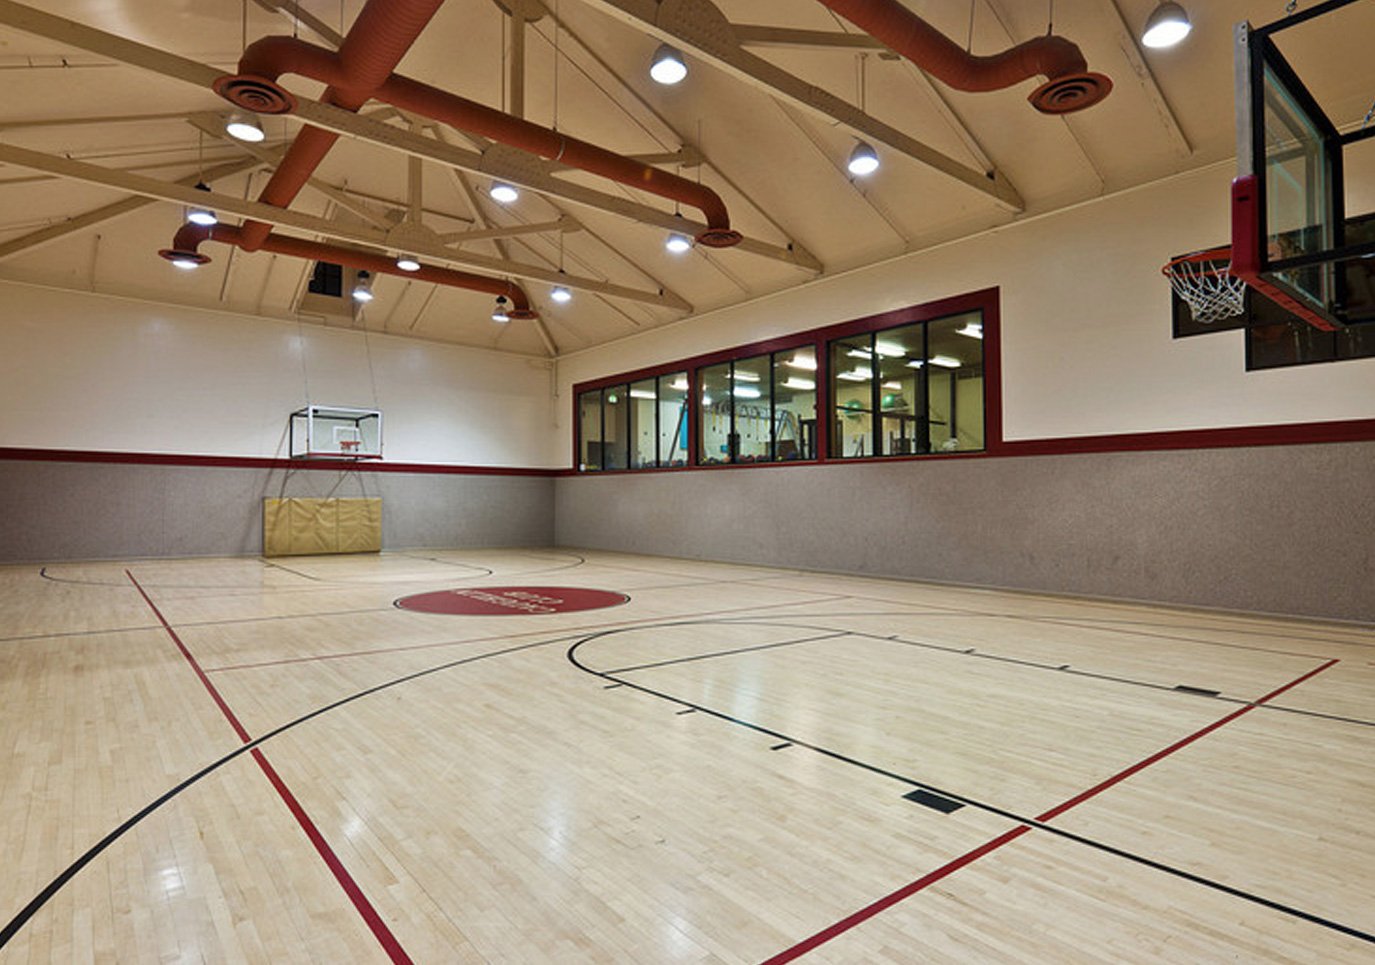 Caughlin Club, a private community clubhouse in Reno, NV designed by Dale Cox Architects